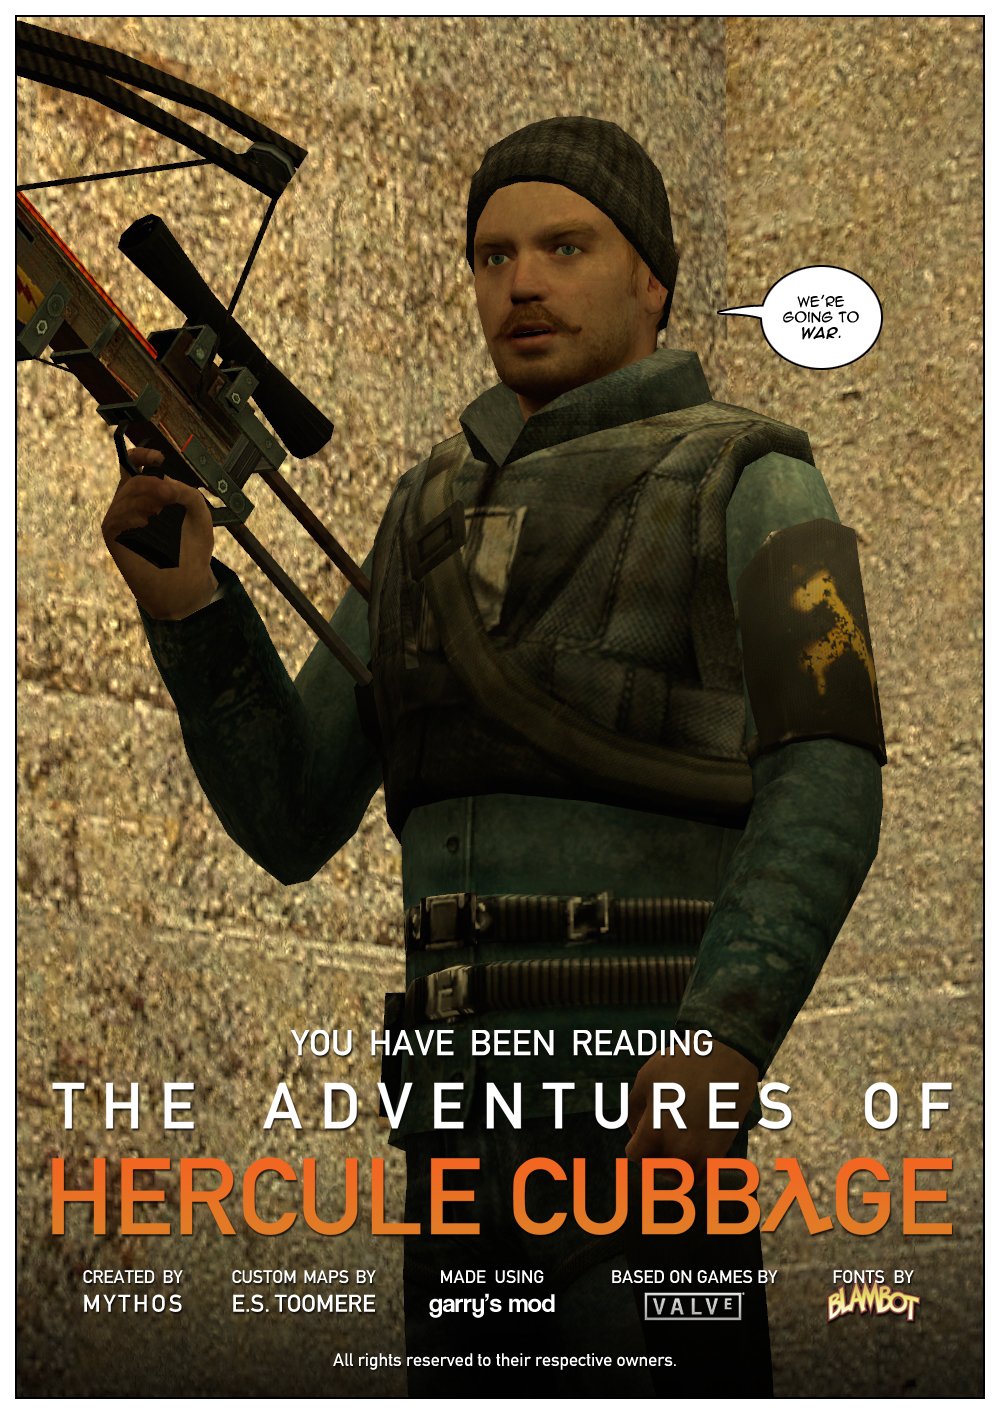 Hercule Cubbage is standing next to the stairs, wearing a rebel uniform and holding his crossbow. He has a confident and serious look on his face as he says: We're going to war. End of chapter 5.